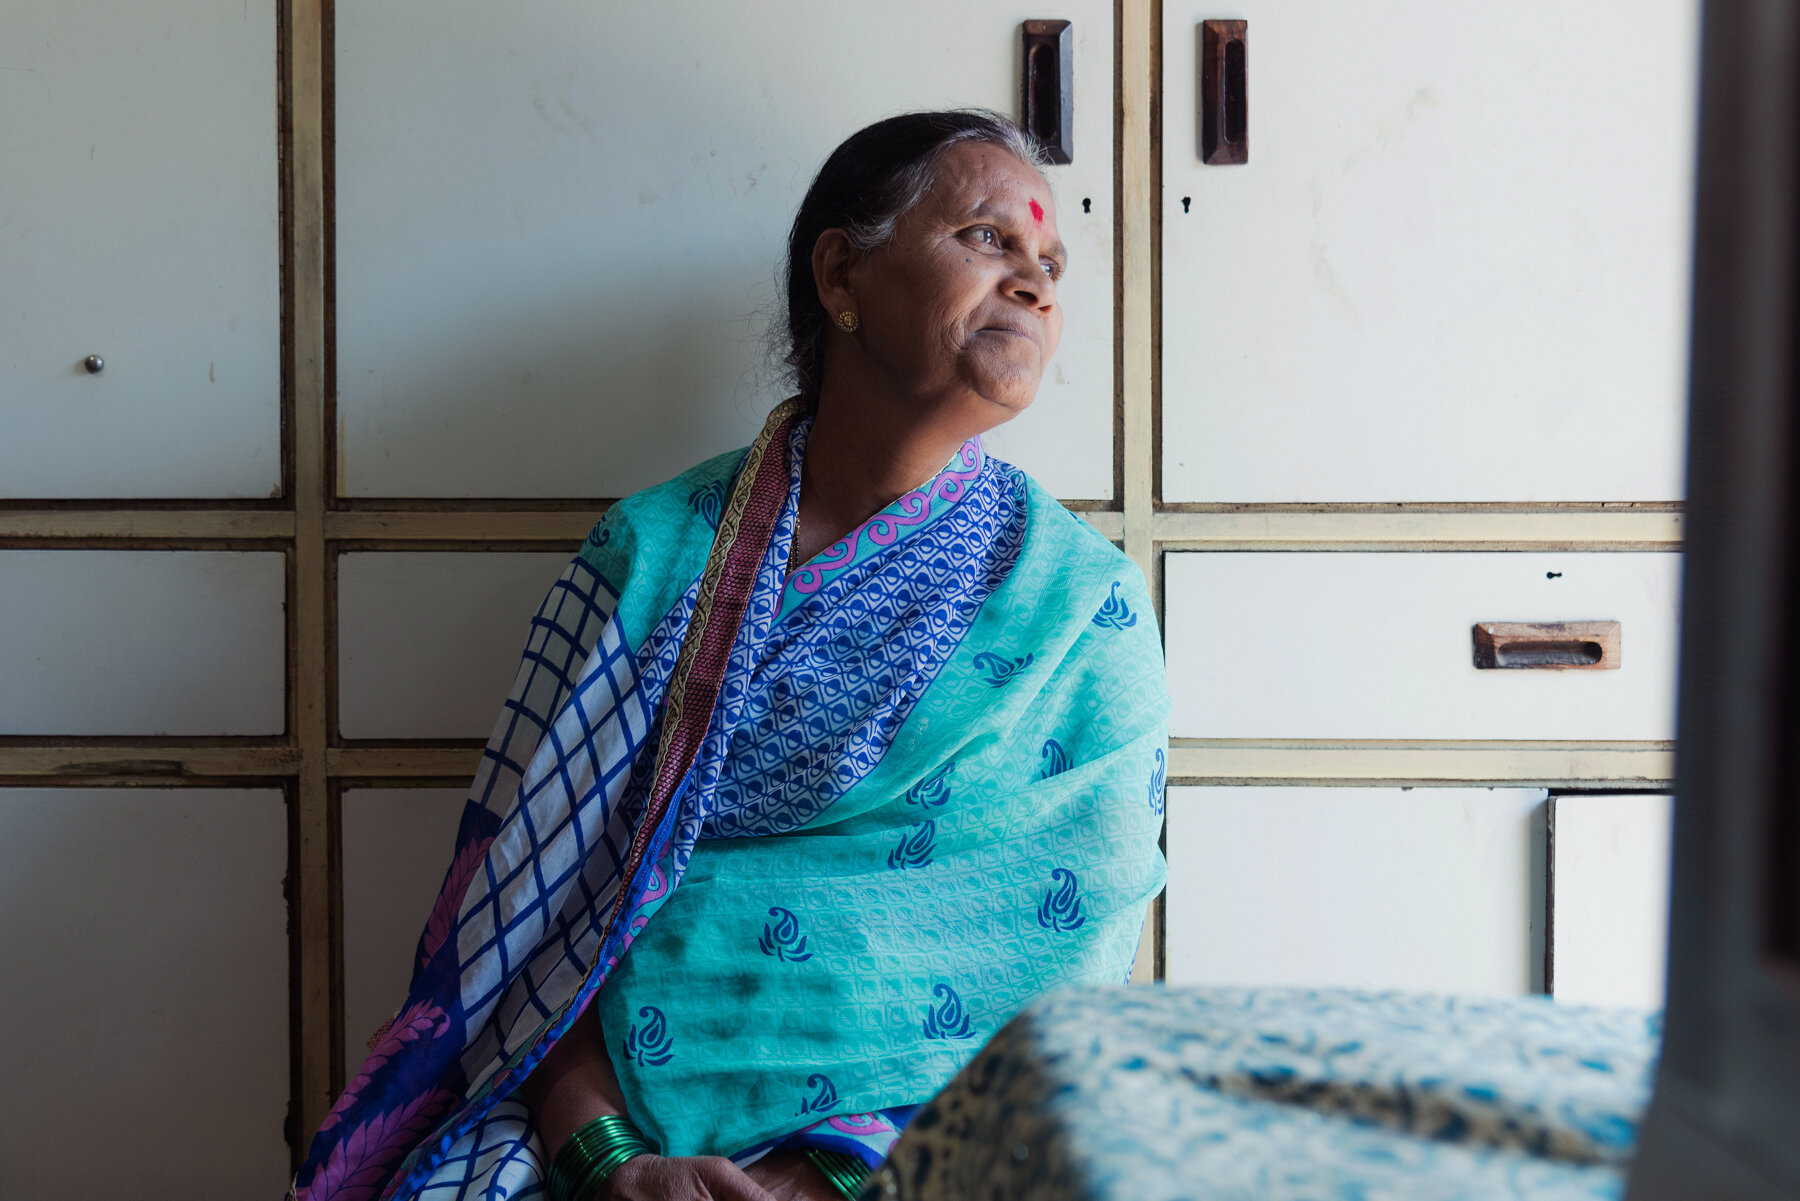  Sharau Shinde, in her 100-year-old house in Bhuinj village. Most of the older women in her village don't know how to read and write and open a bank account. The Mann Deshi Foundation addresses all these issues, which can hinder women from being econ